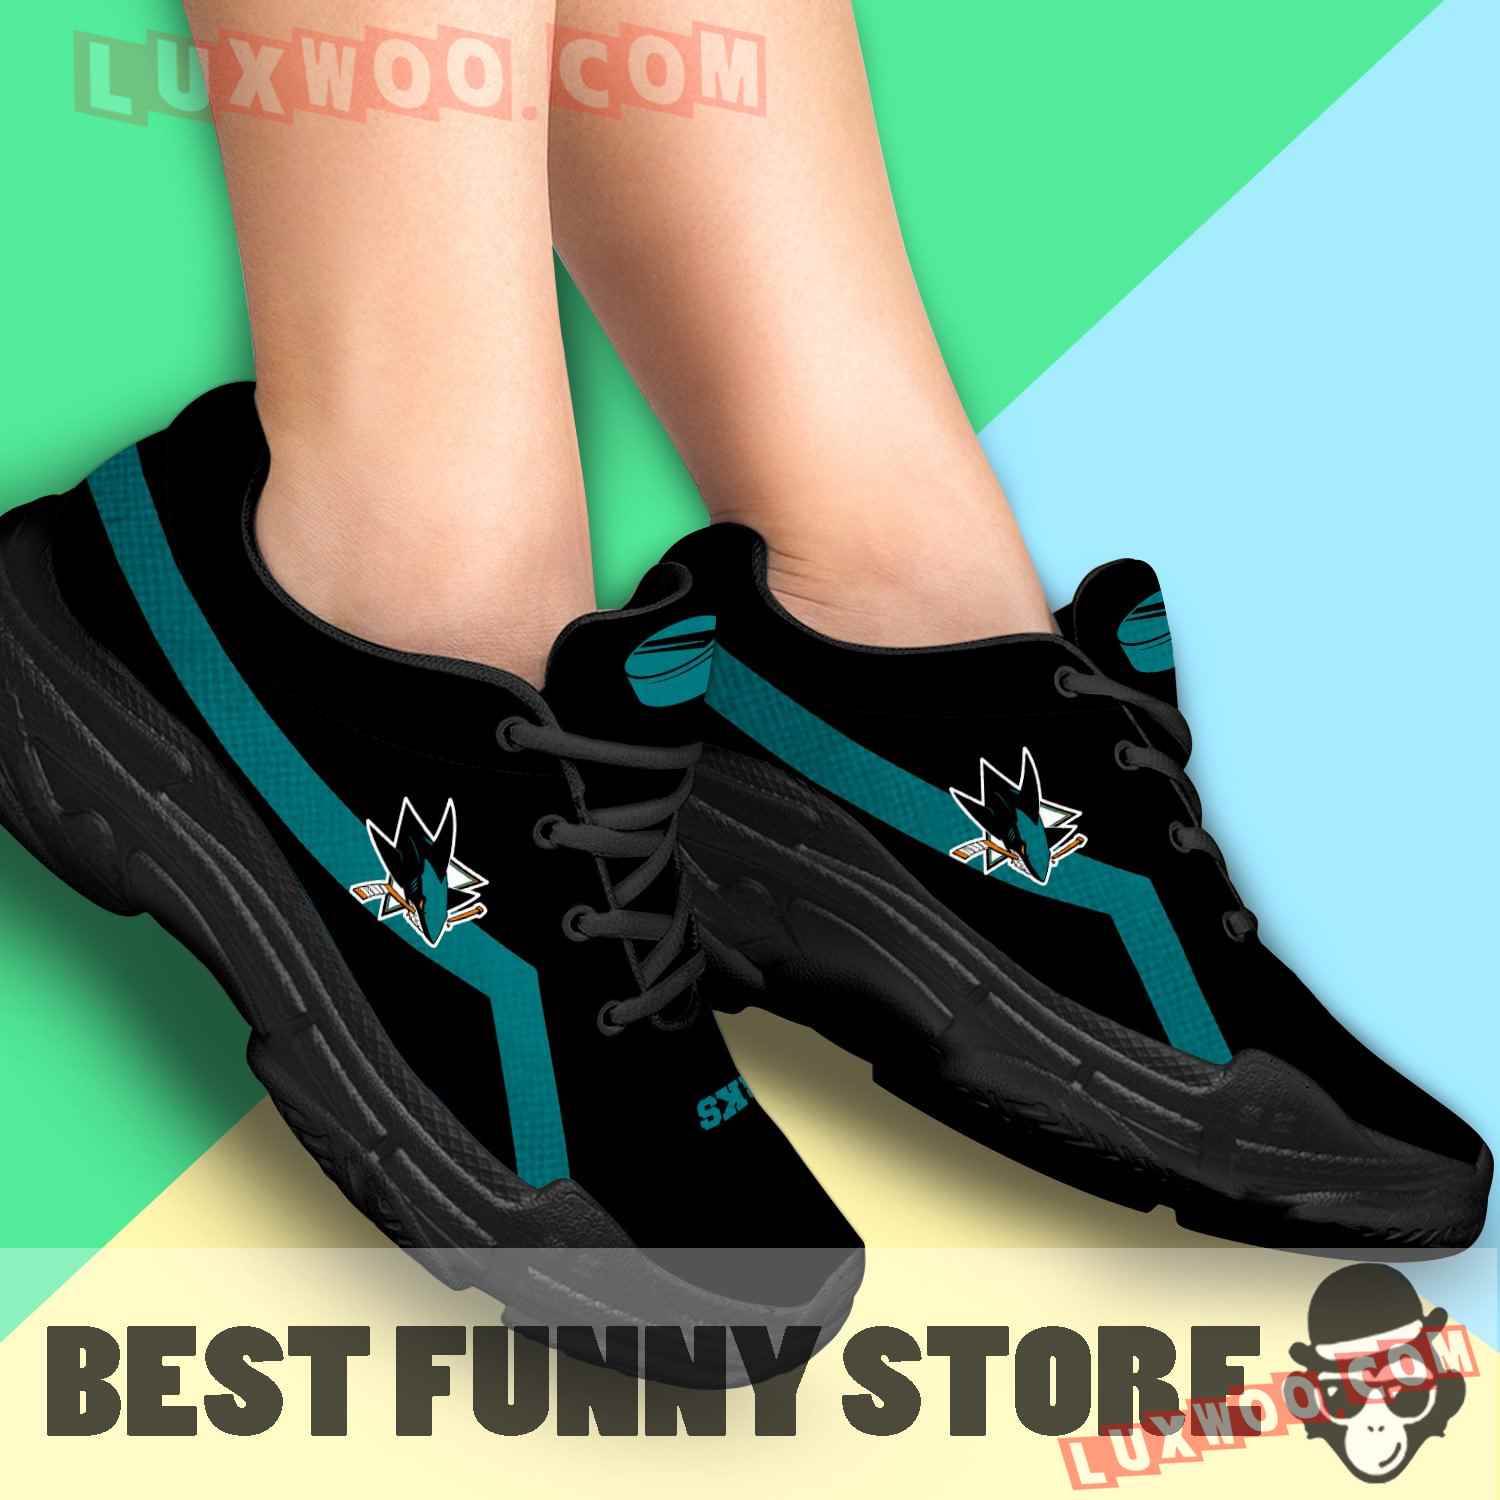 Edition Chunky Sneakers With Line San Jose Sharks Shoes - Luxwoo.com